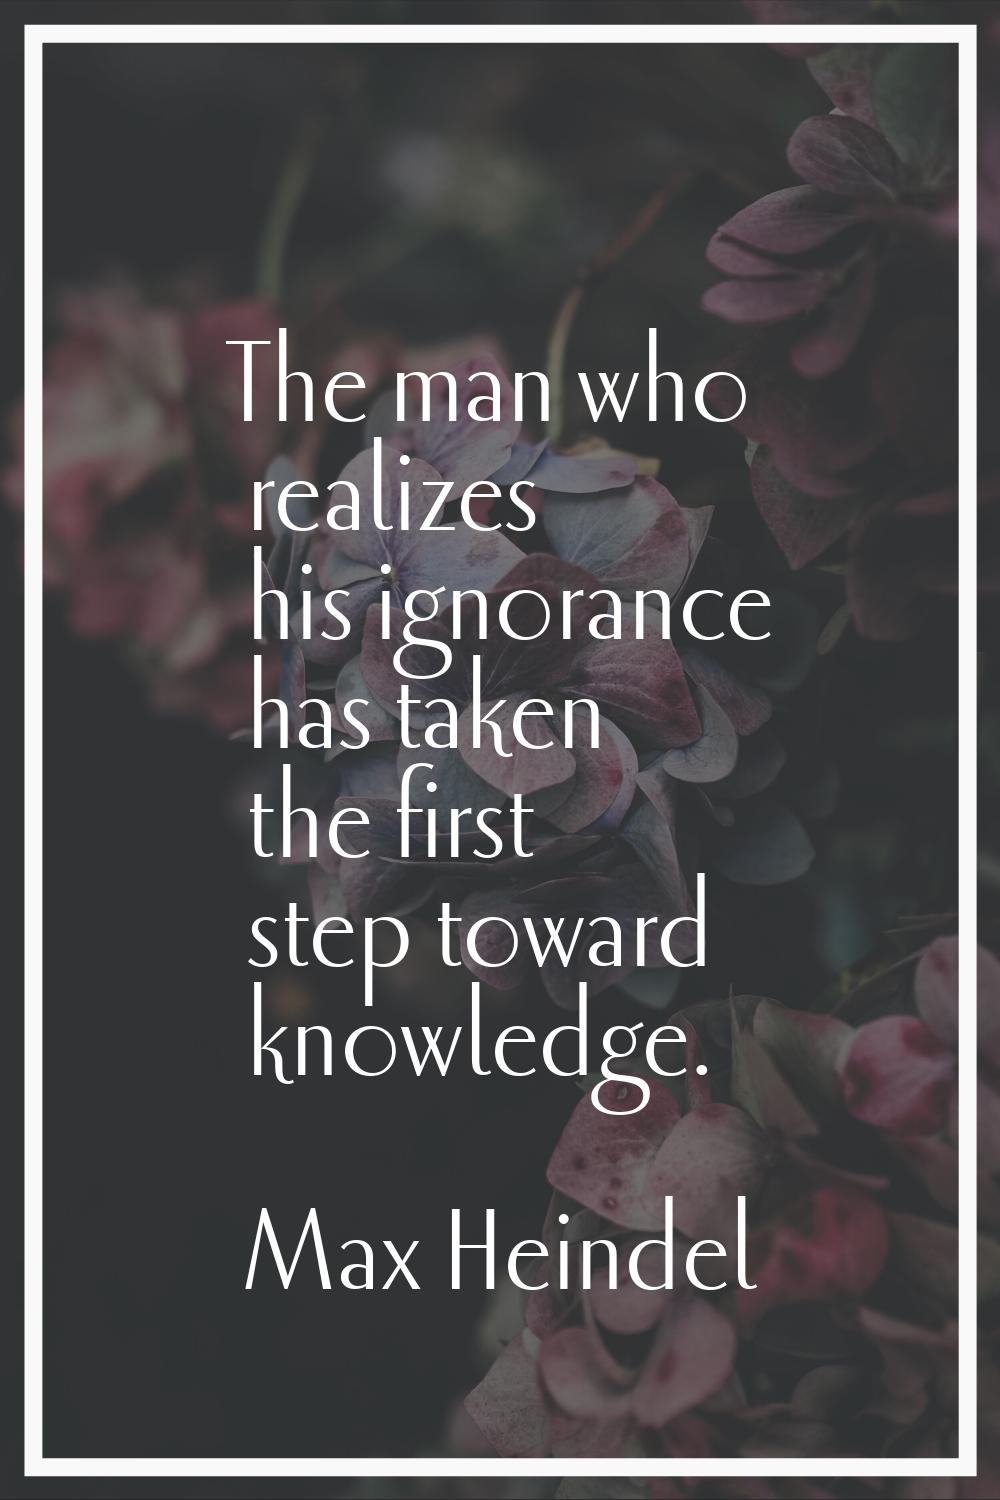 The man who realizes his ignorance has taken the first step toward knowledge.